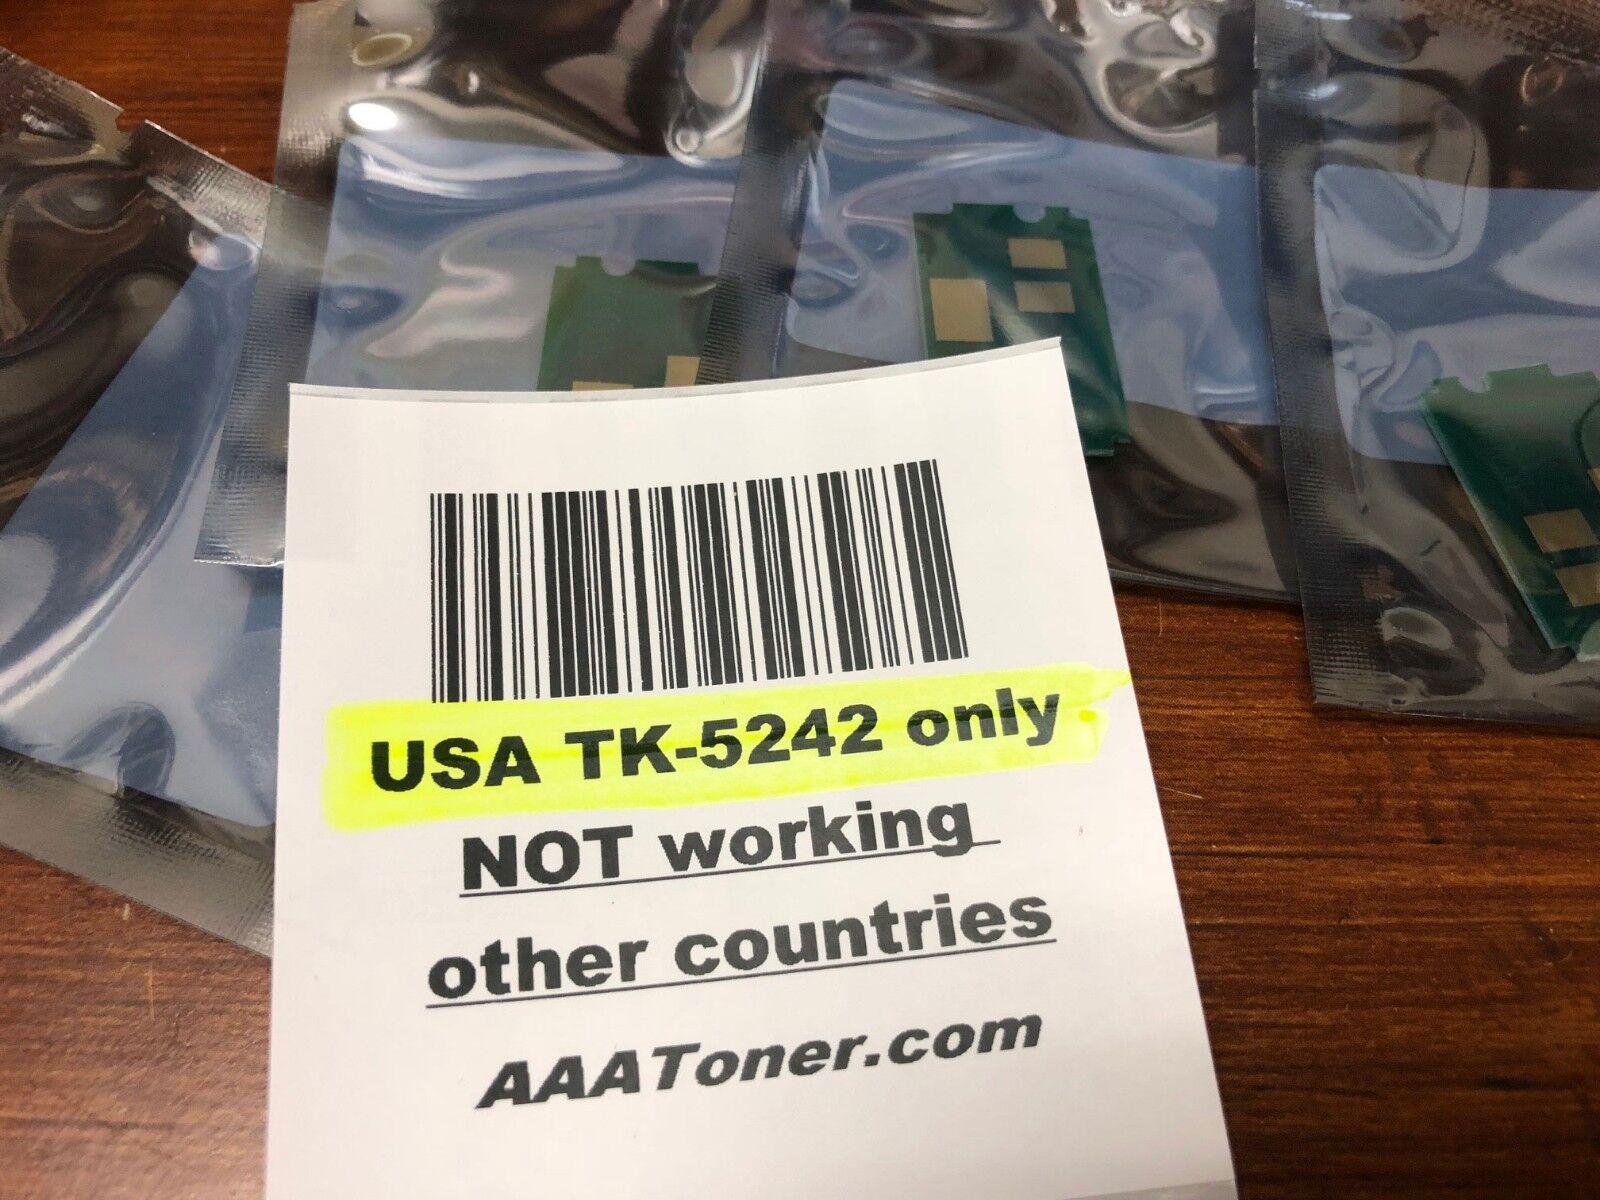 4 Toner Chips Compatible with Kyocera M5526cdw, P5026cdw (TK-5242)